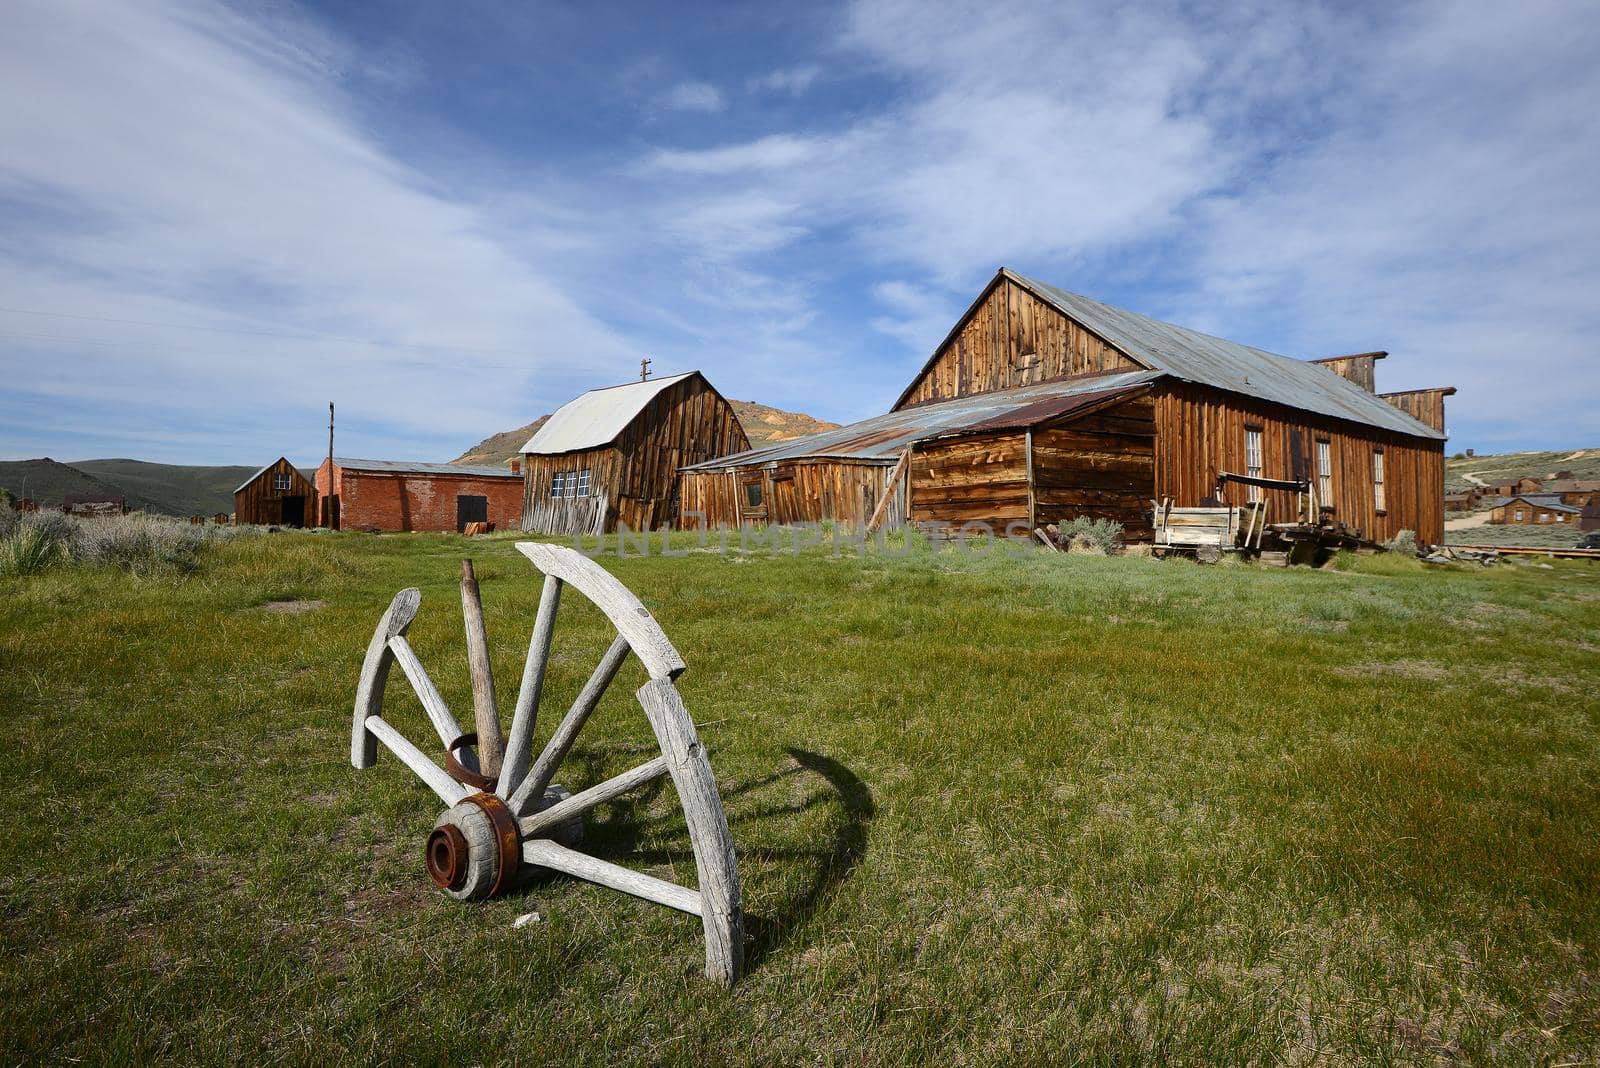 Bodie is a historic state park of a ghost town from a gold rush era in Sierra Nevada